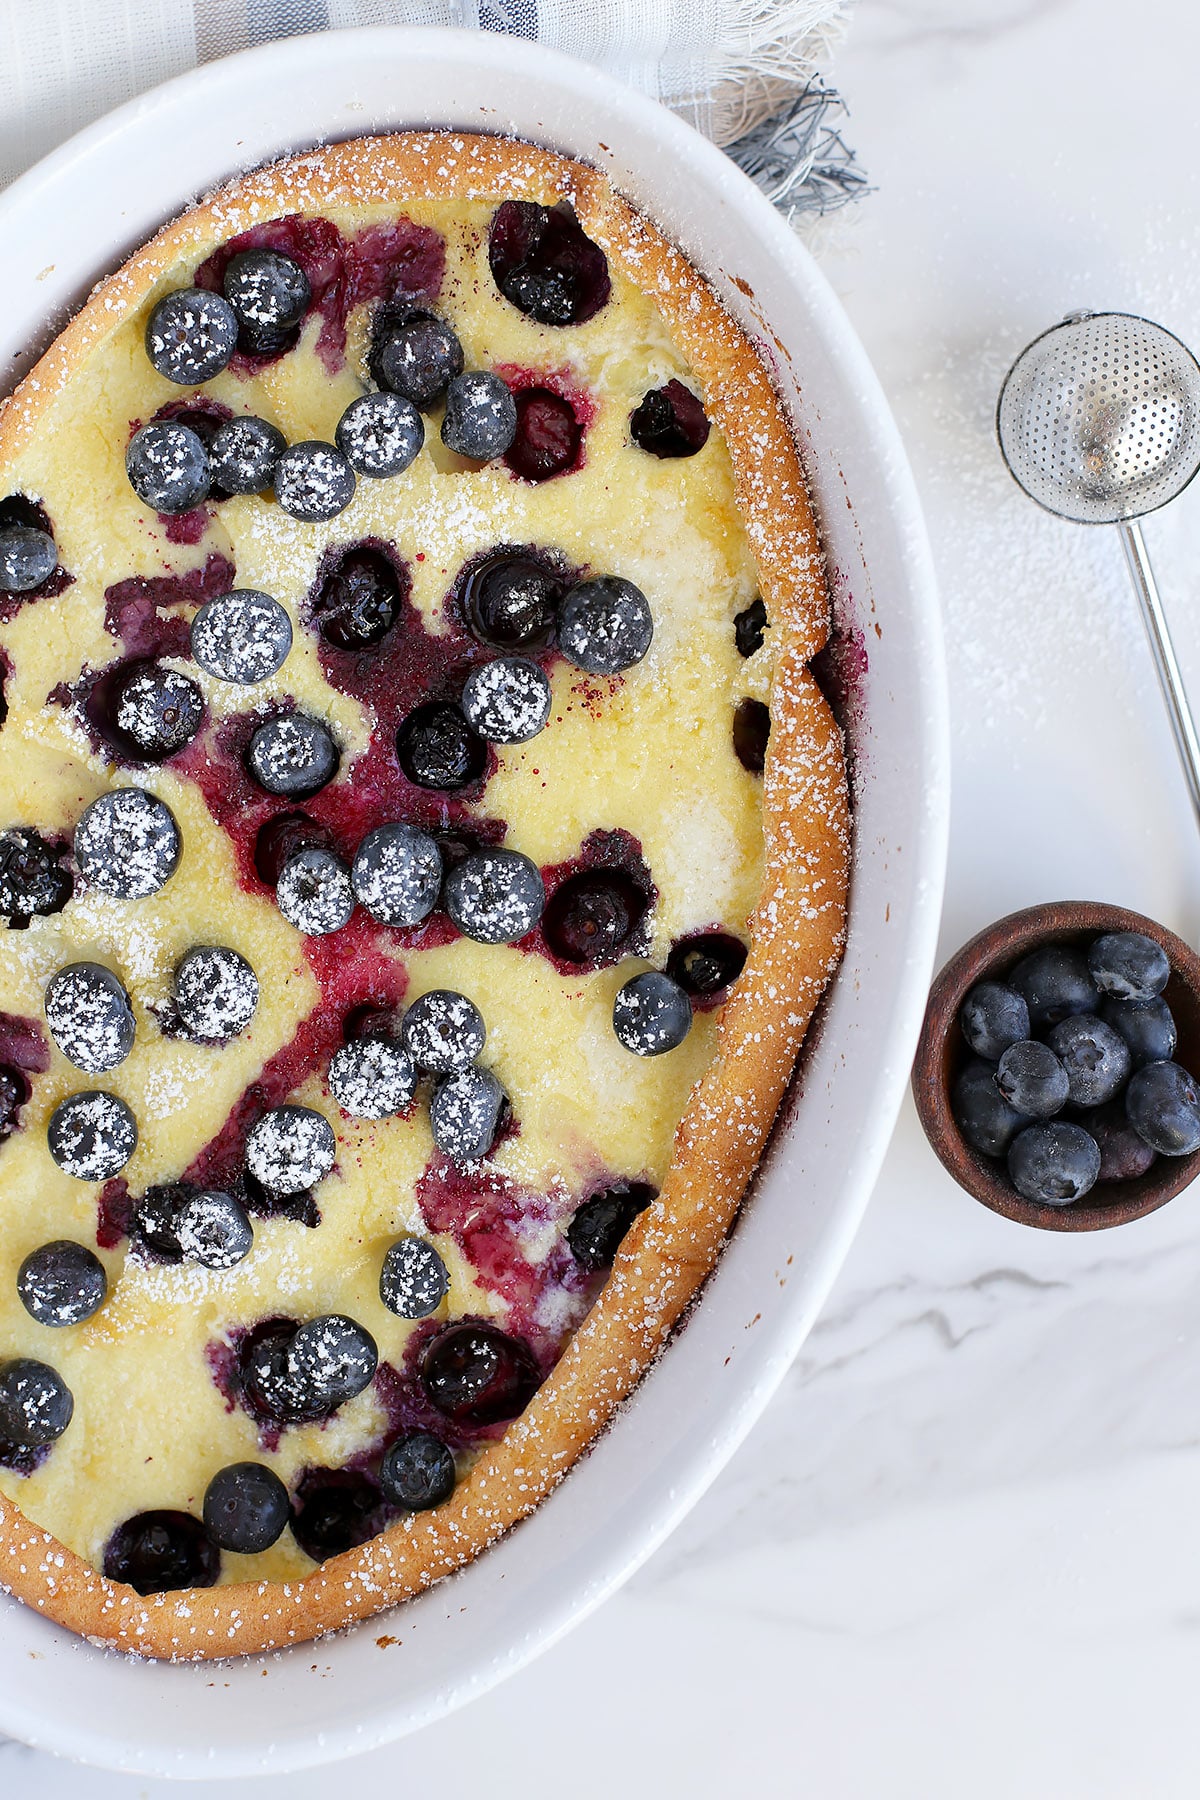 A dutch baby pancake topped with fresh blueberries and baked in a white ceramic baking dish.